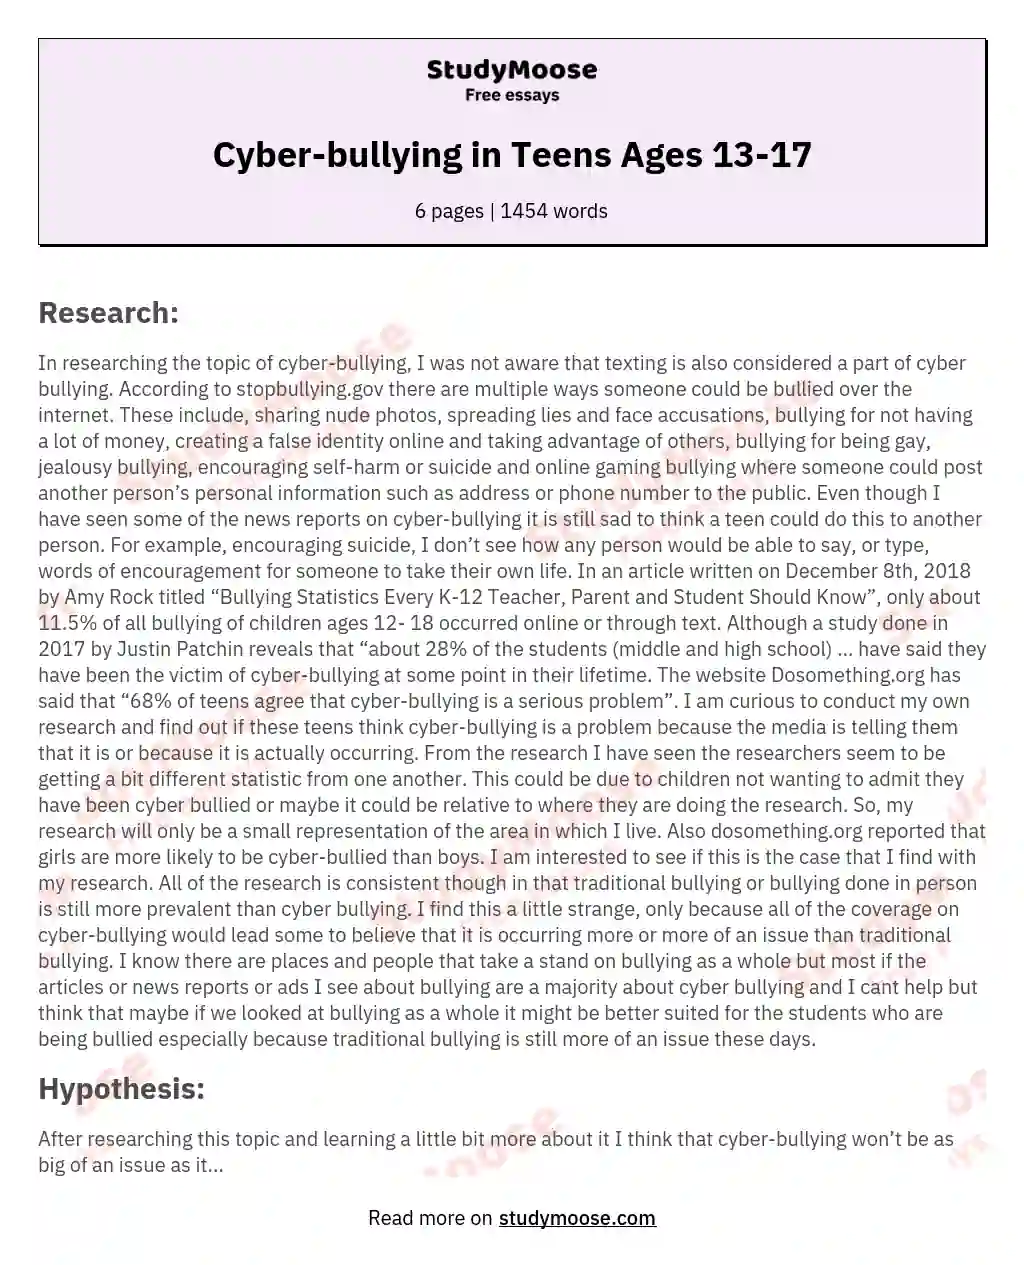 Cyber-bullying in Teens Ages 13-17 essay